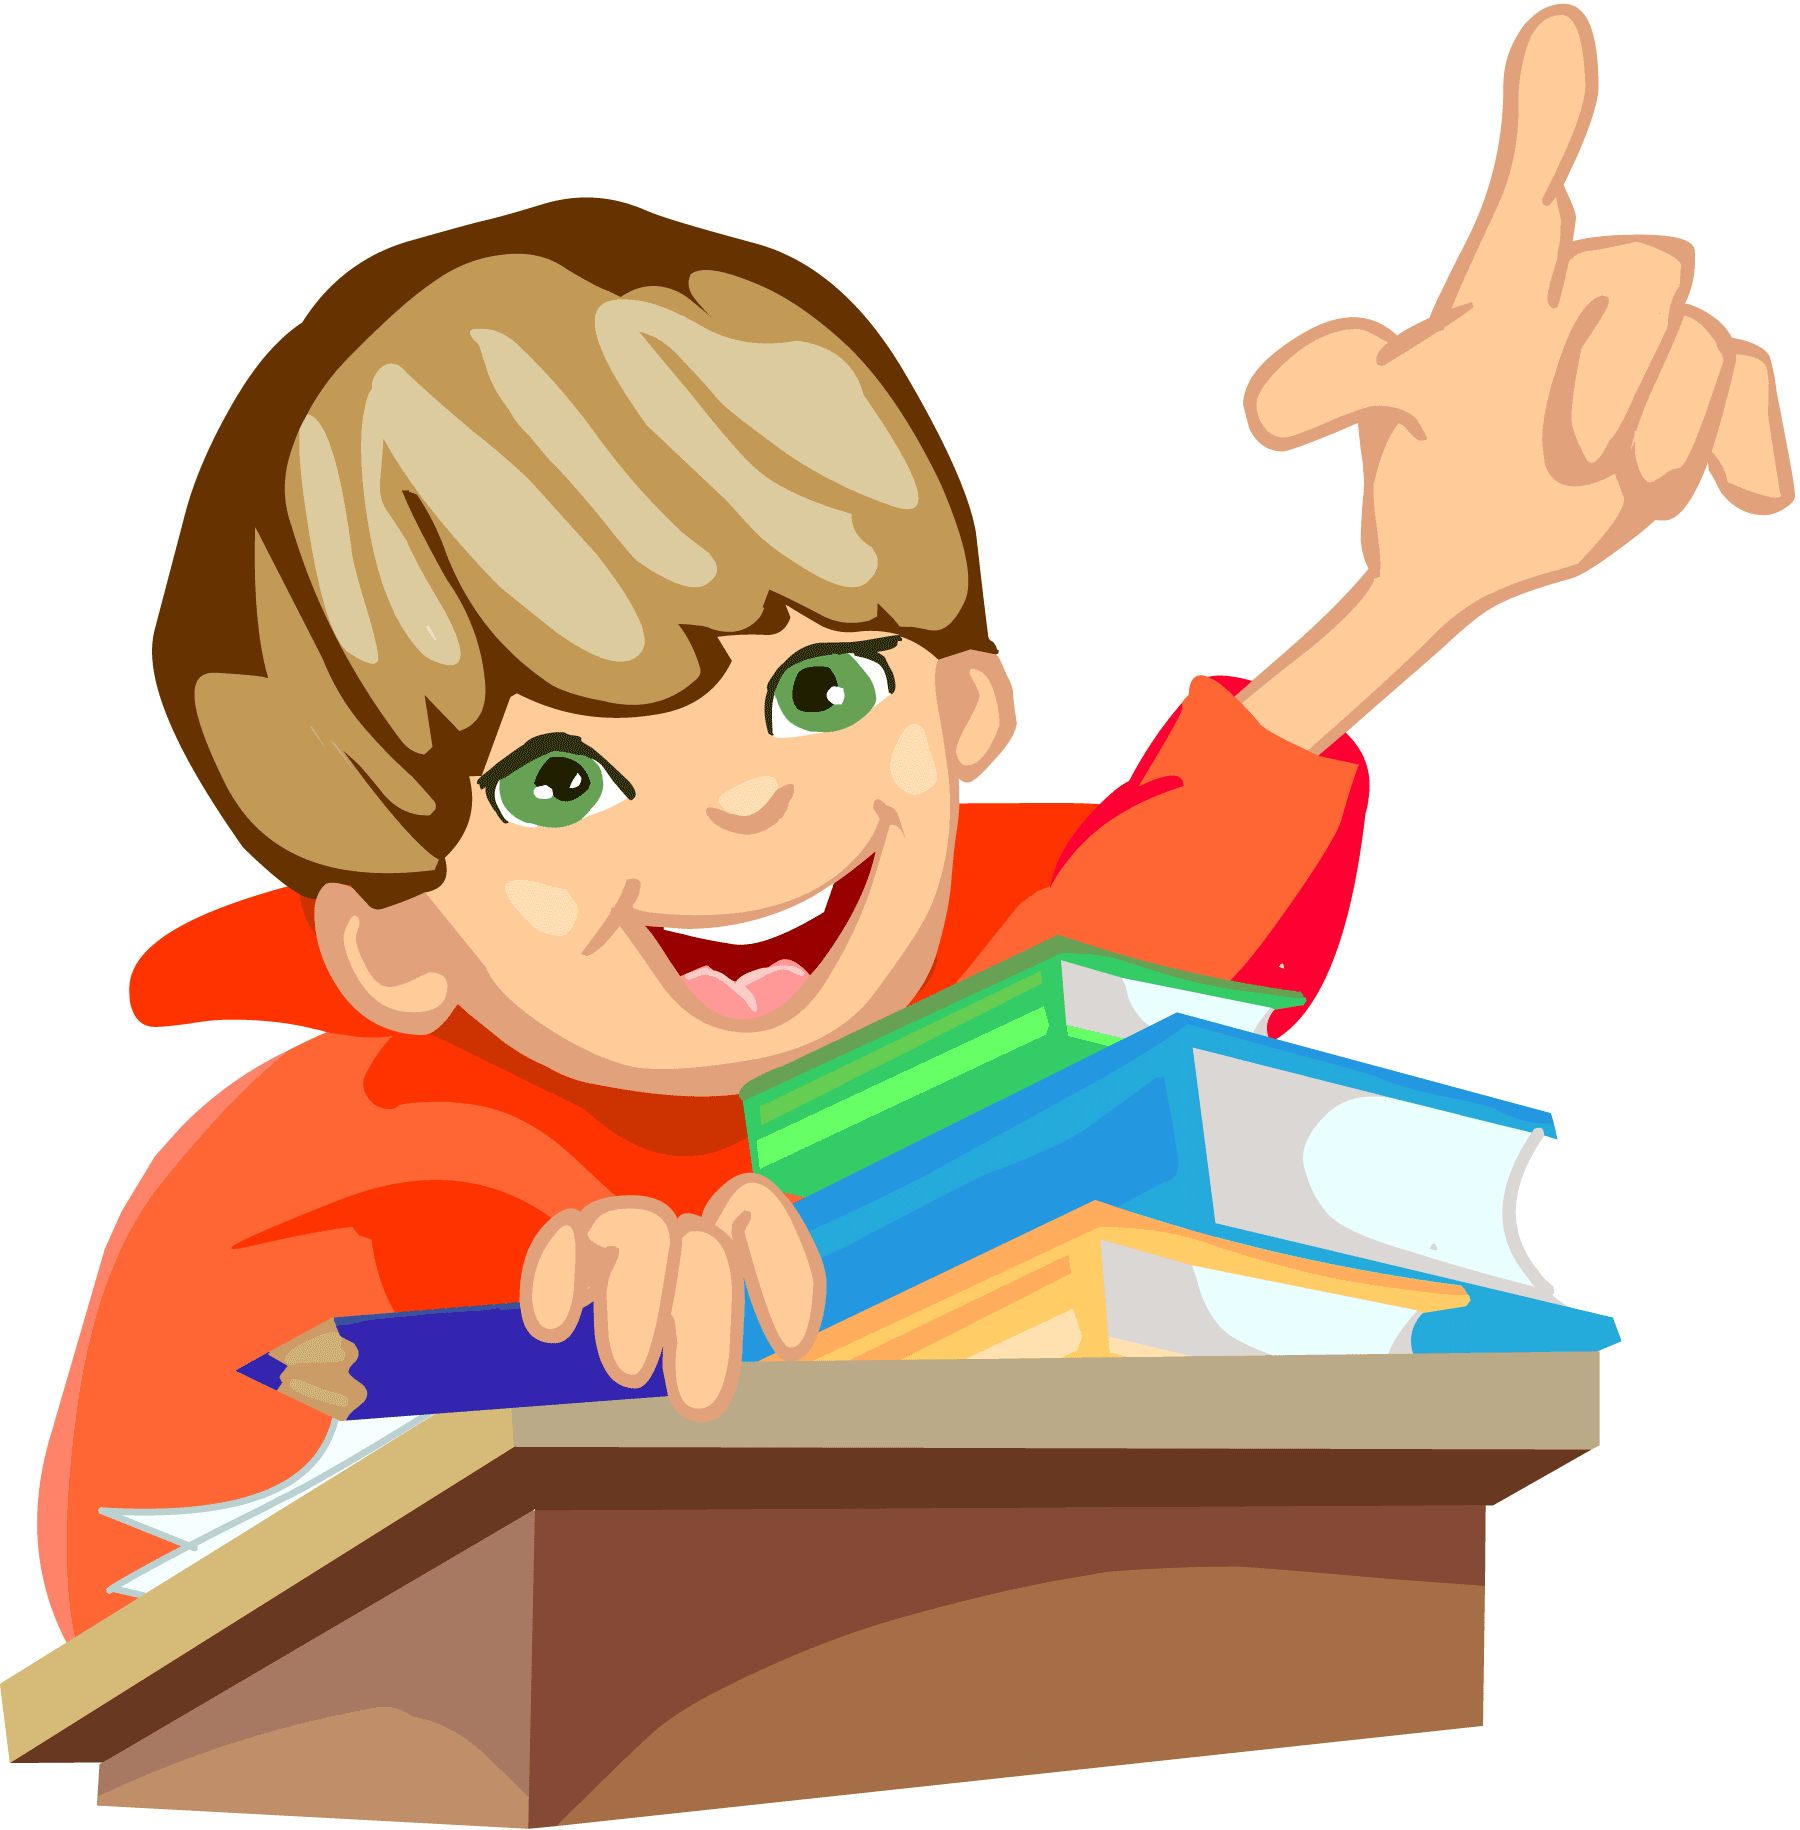 education clipart download - photo #11